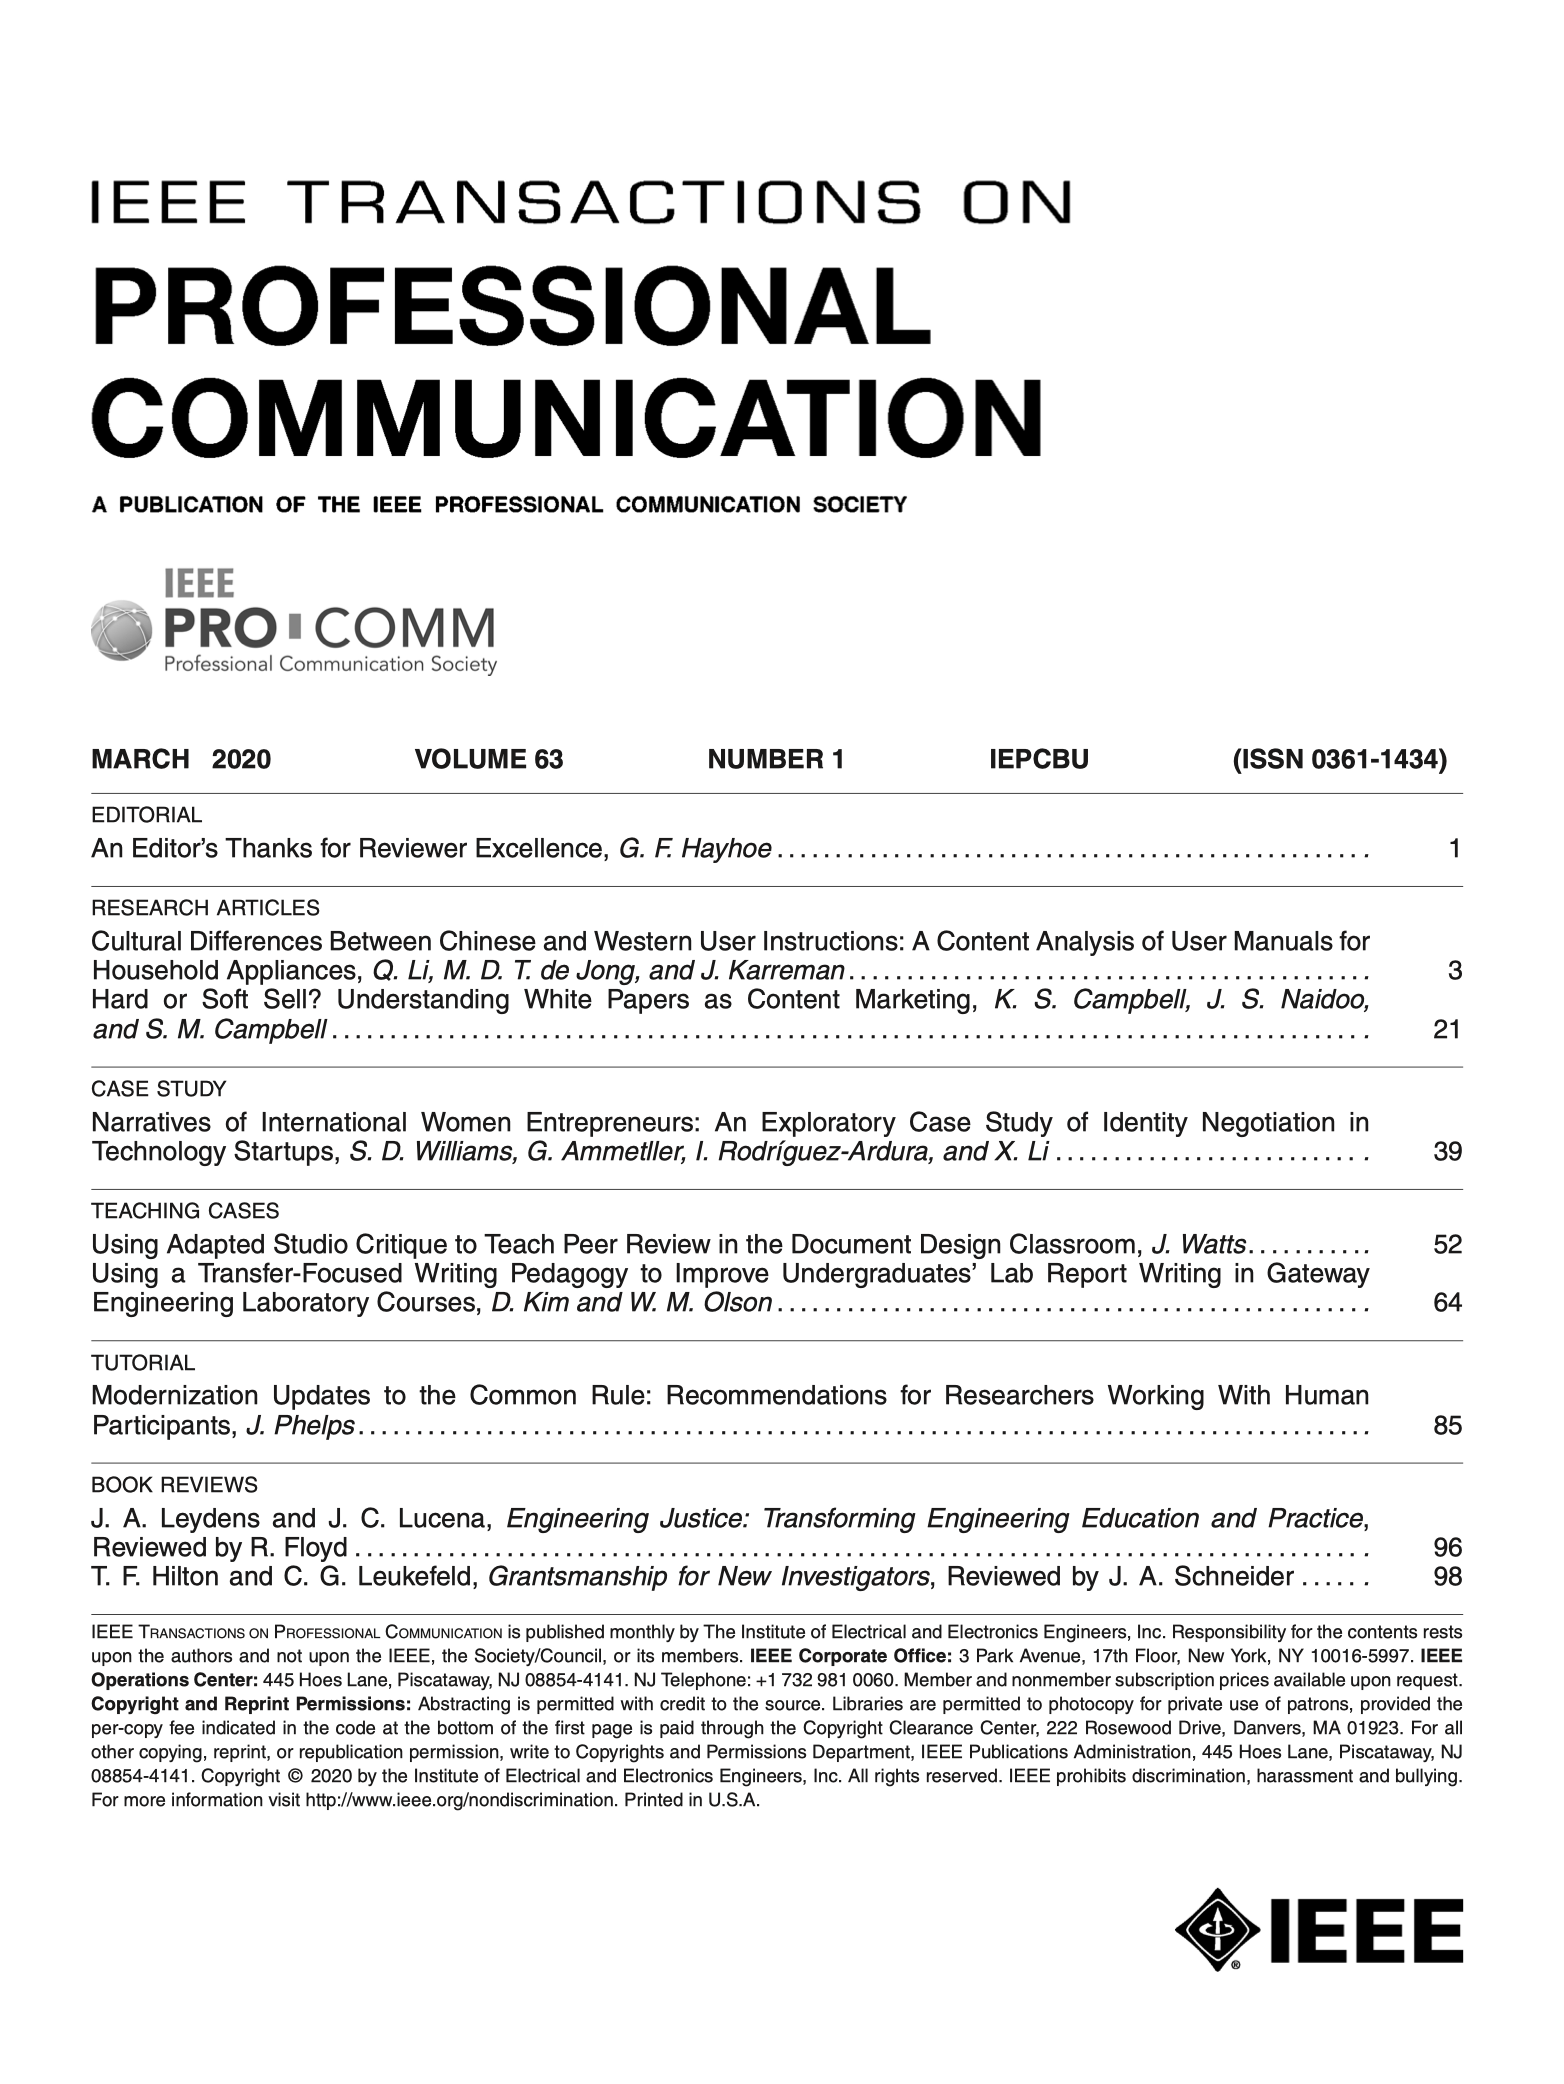 Volume 63 Number 1 March Of Ieee Transactions On Professional Communication Now Available Ieee Professional Communication Society